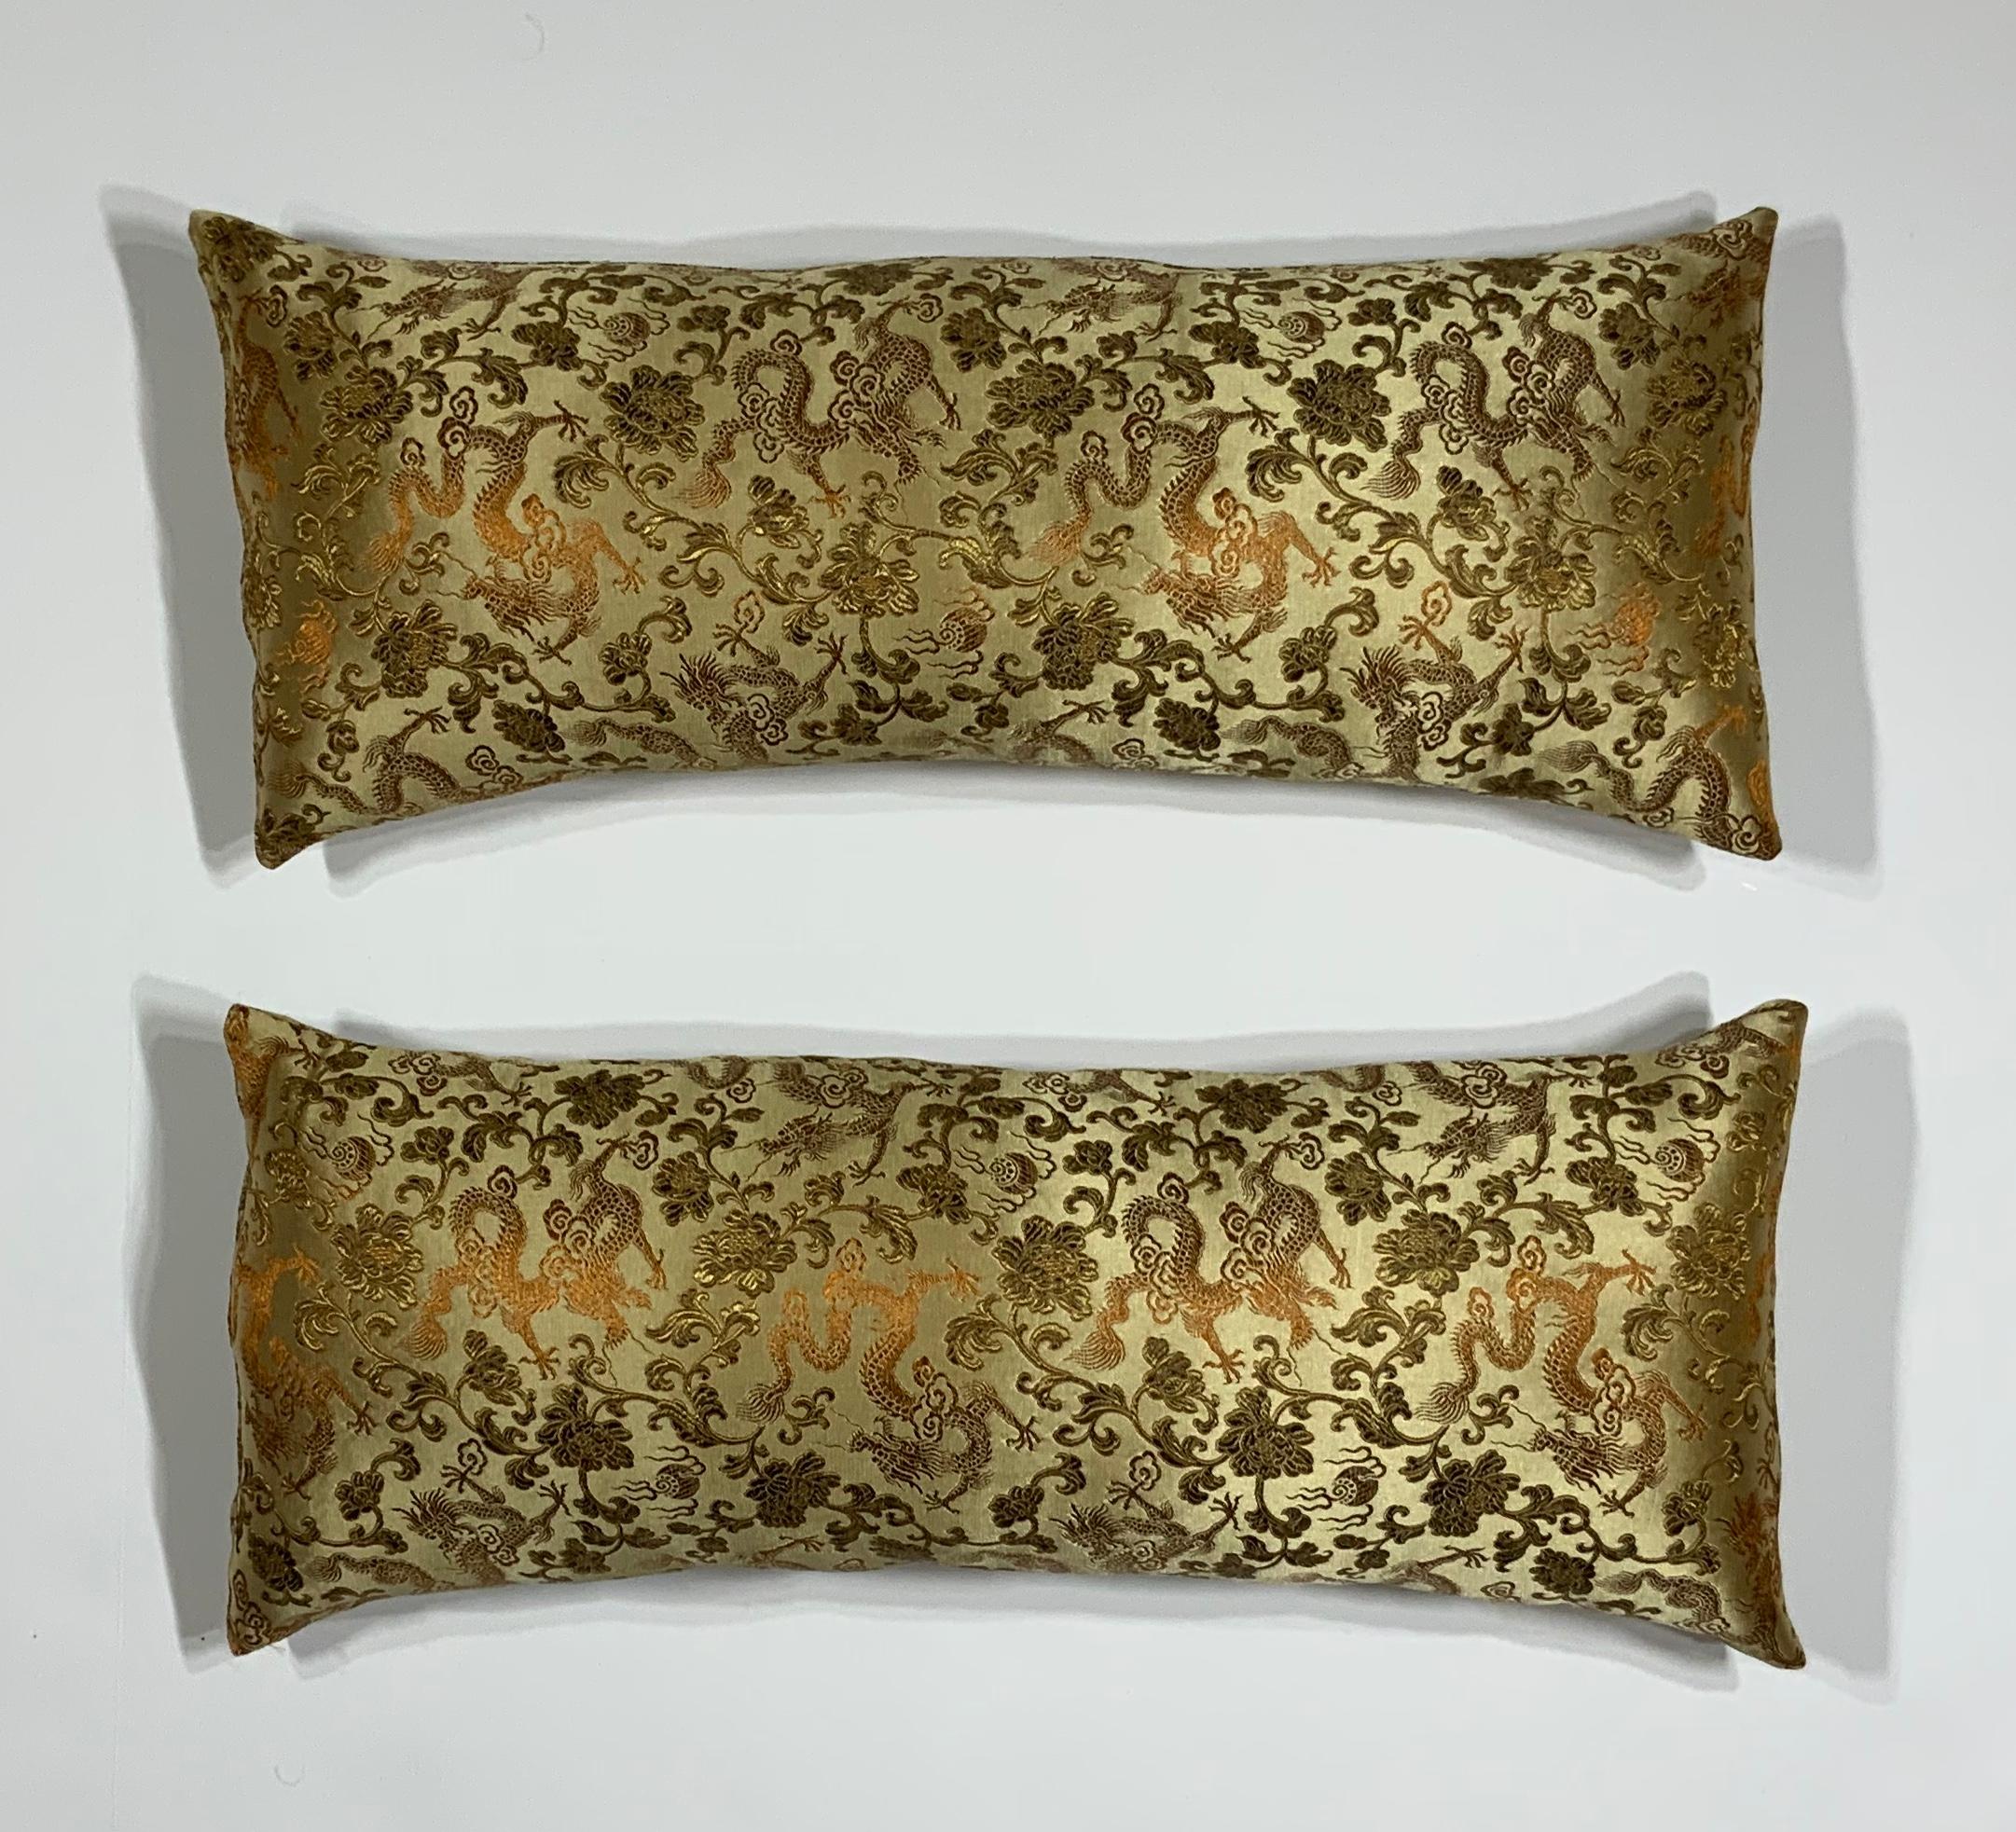 Pair of beautiful pillow made of vintage silk Chinese textile, all around .with elegant motifs of flowers and Chinese dragon on gold colors background.
Fresh inserts.